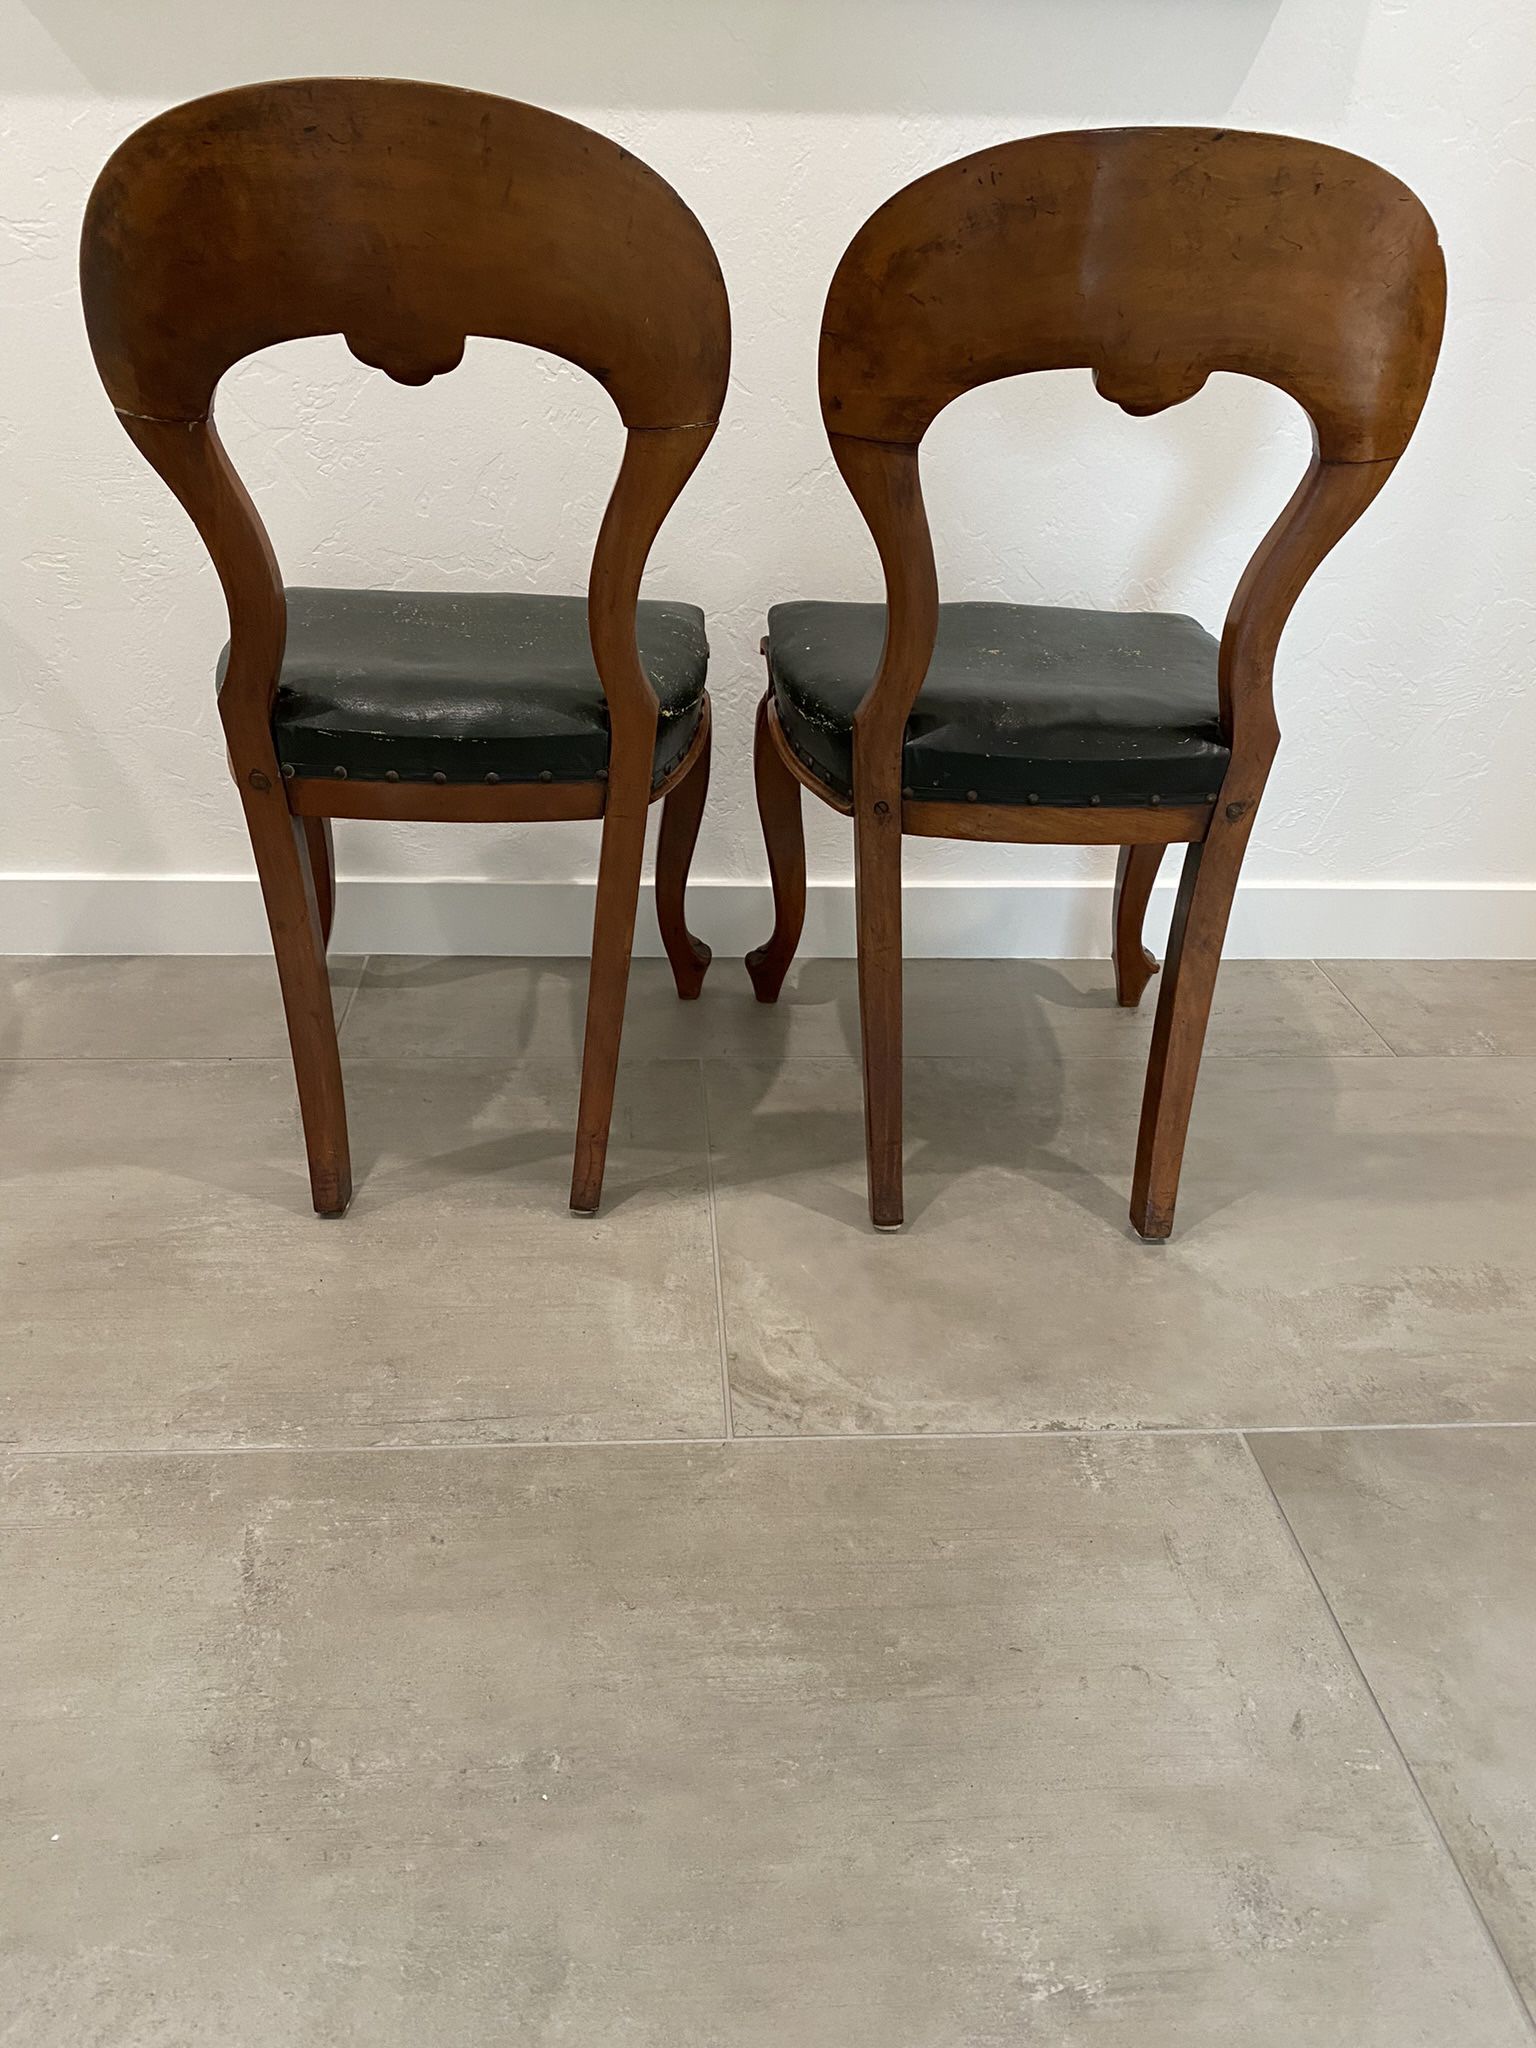 Antique chairs, leather cushions